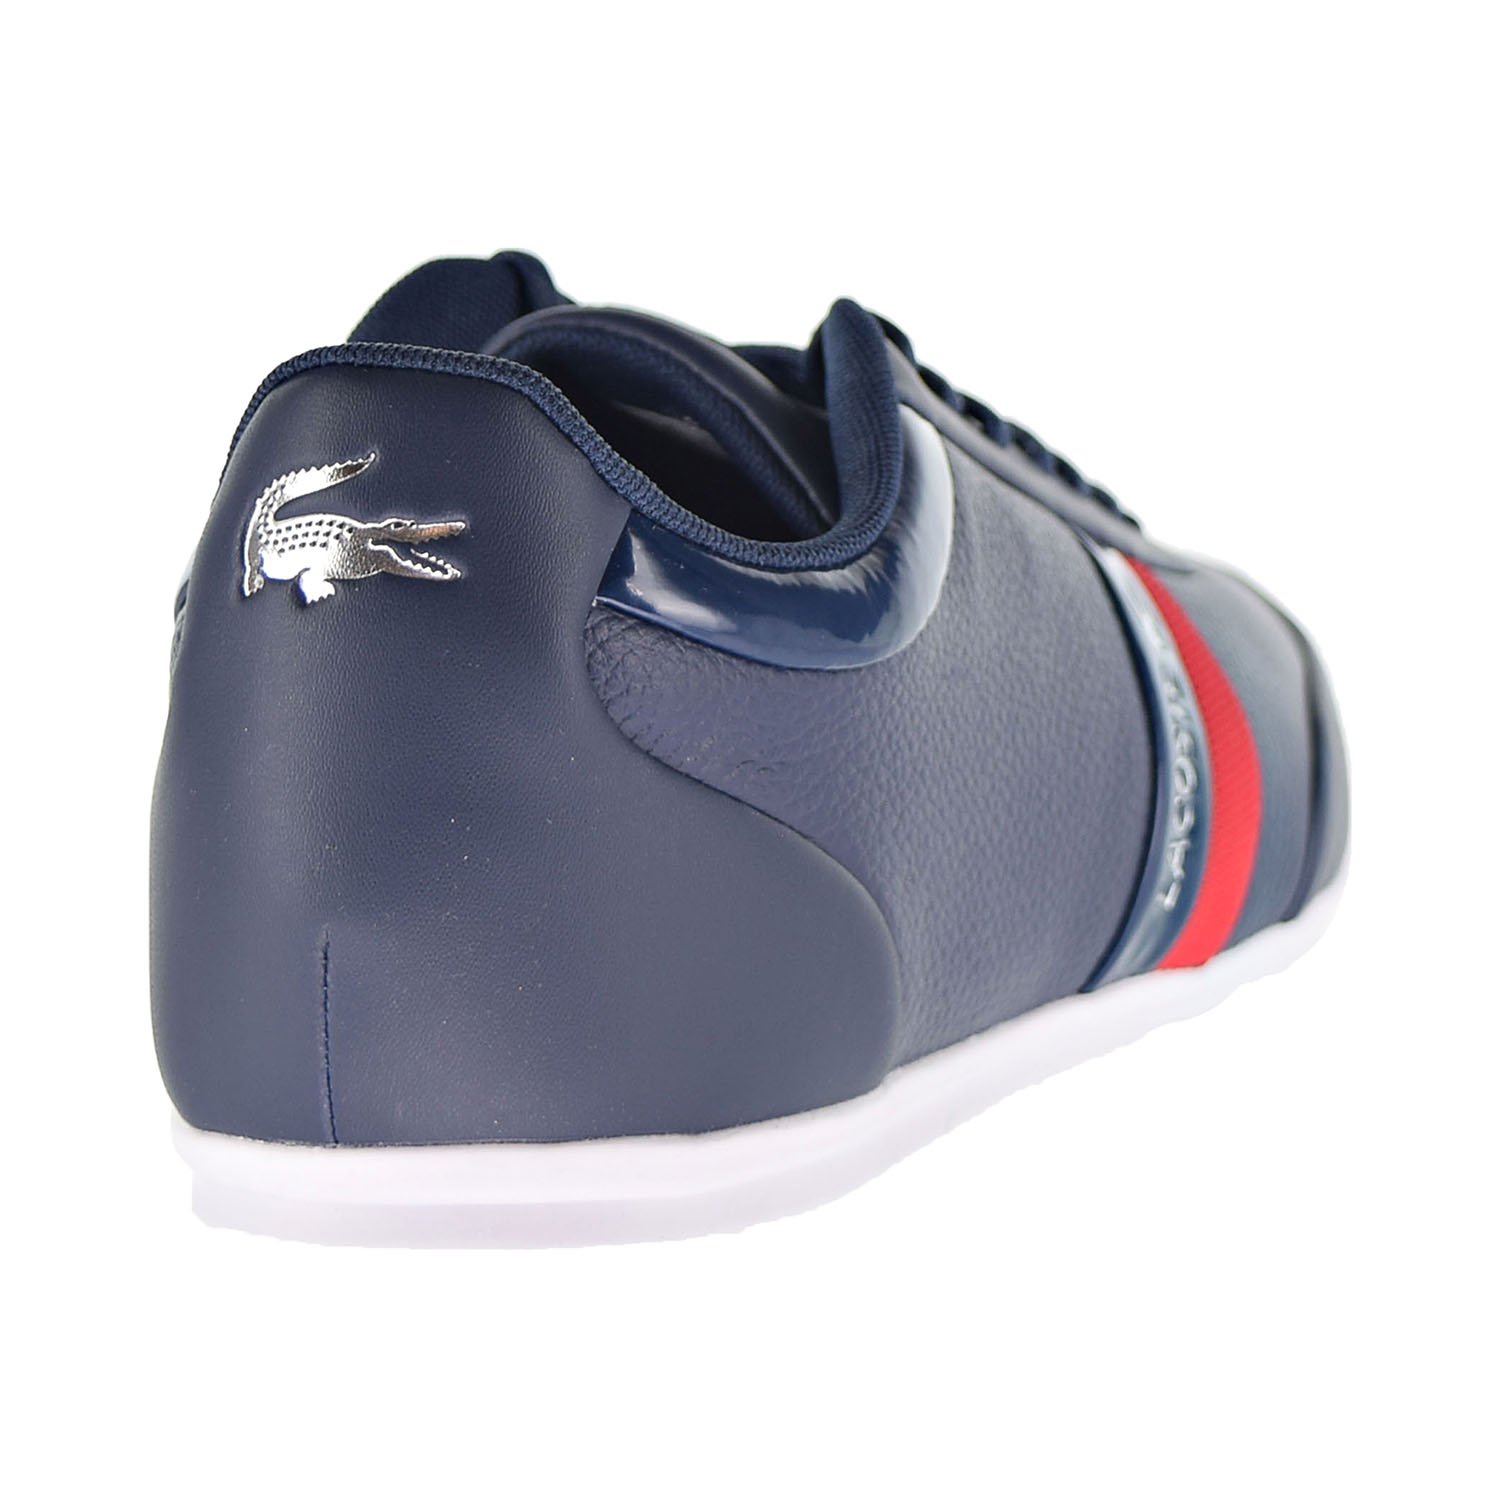 lacoste shoes navy